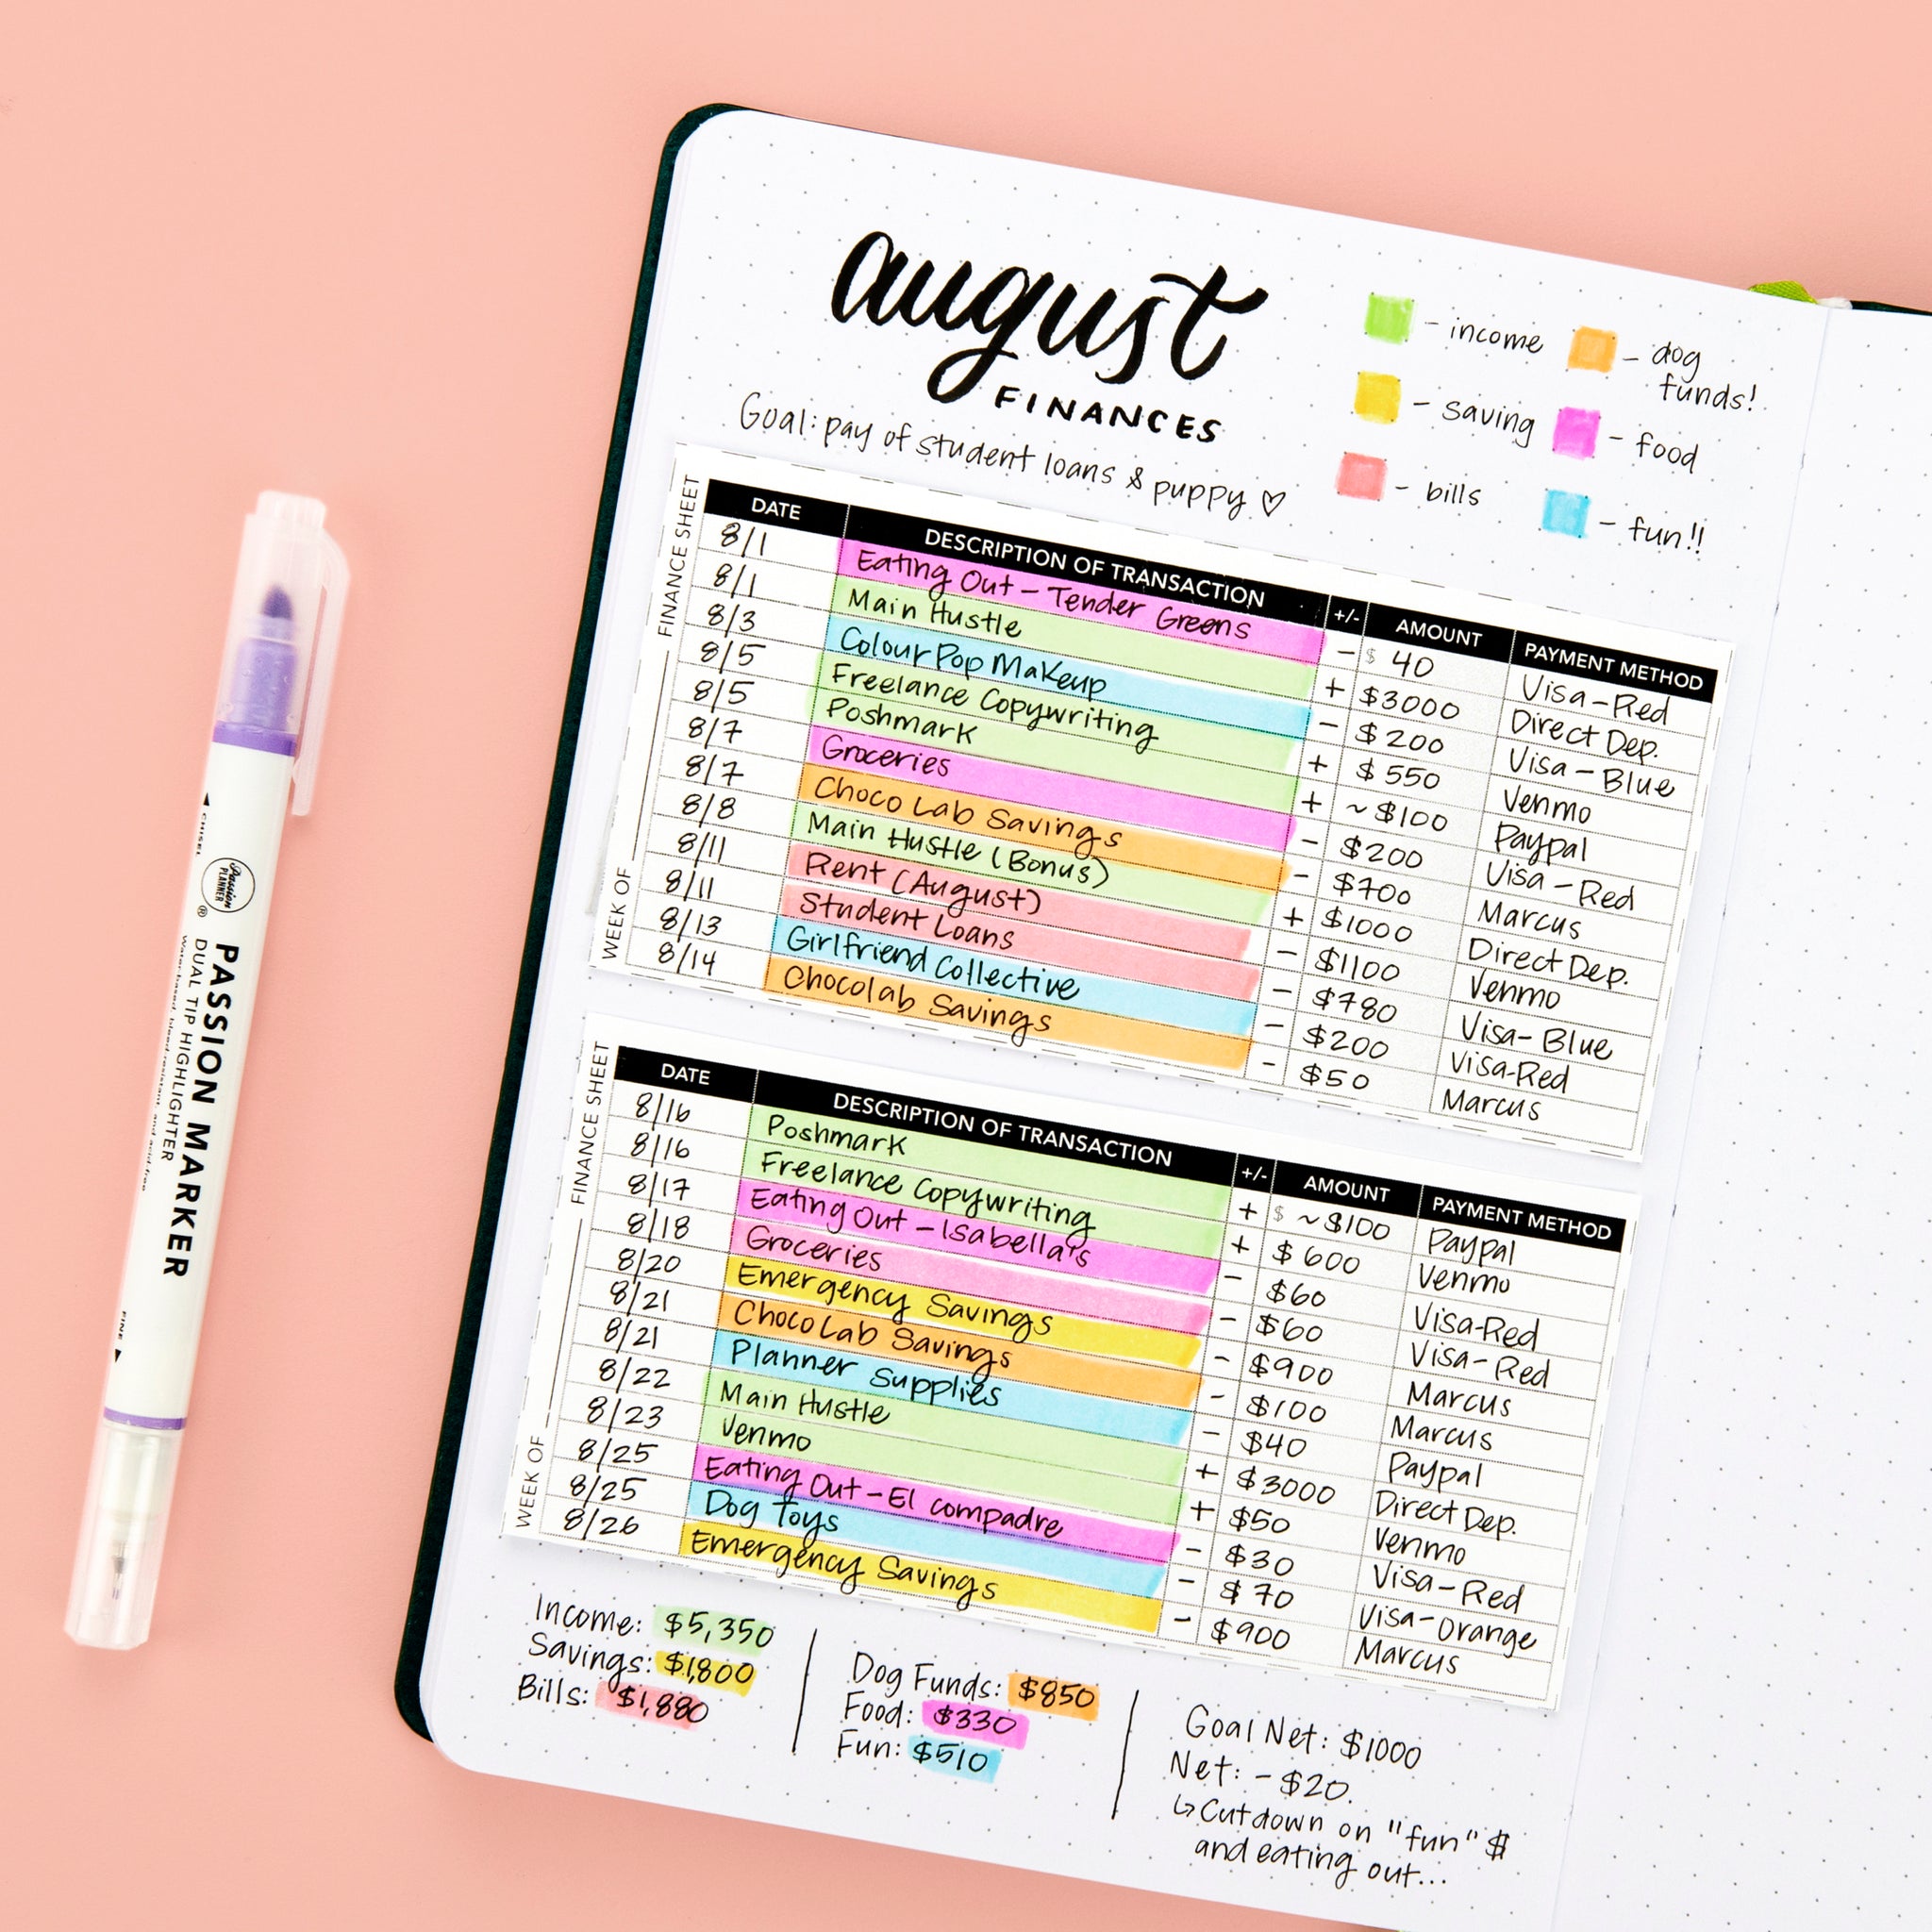 Using Colorful Pens In Your Planner - 10 Tips! 